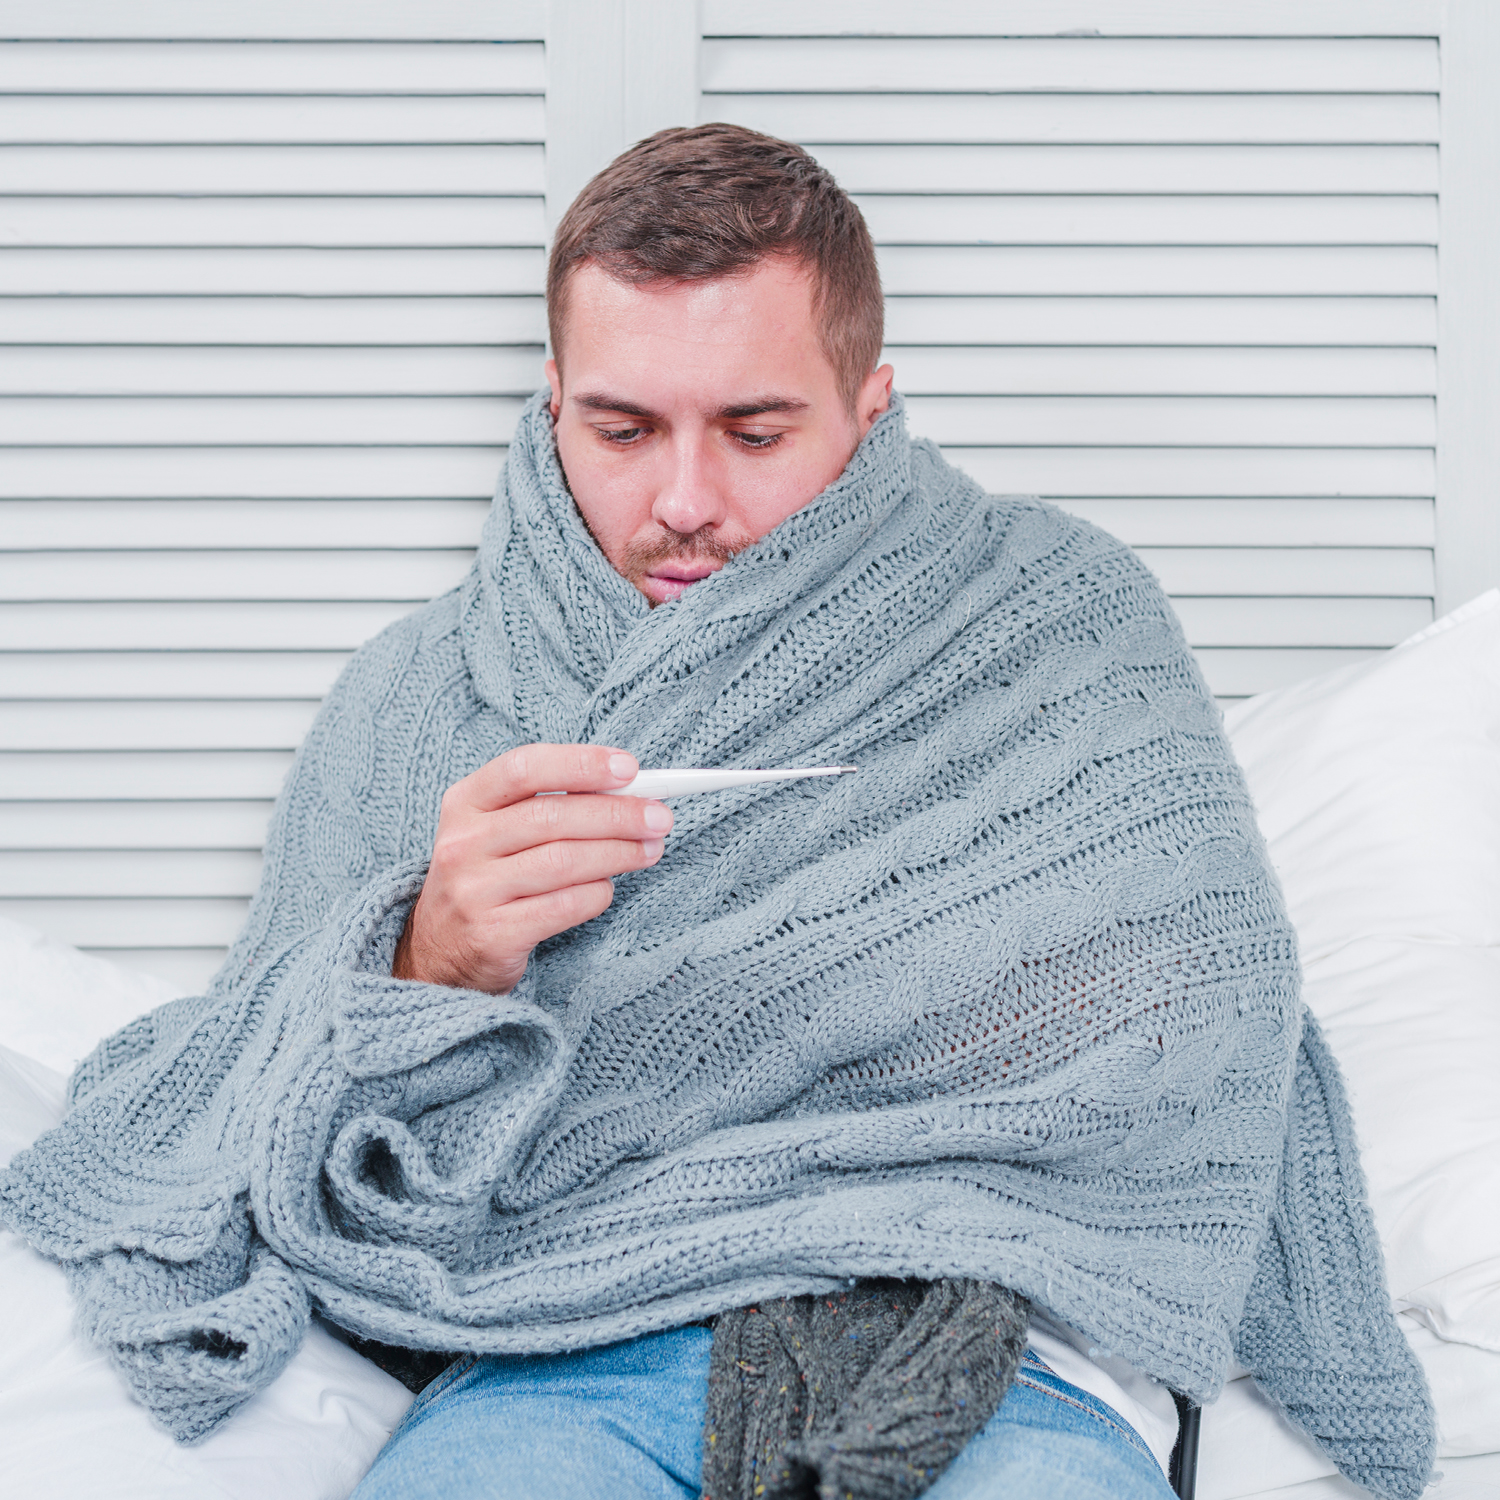 9 Home Remedies To Get Rid of Viral Fever